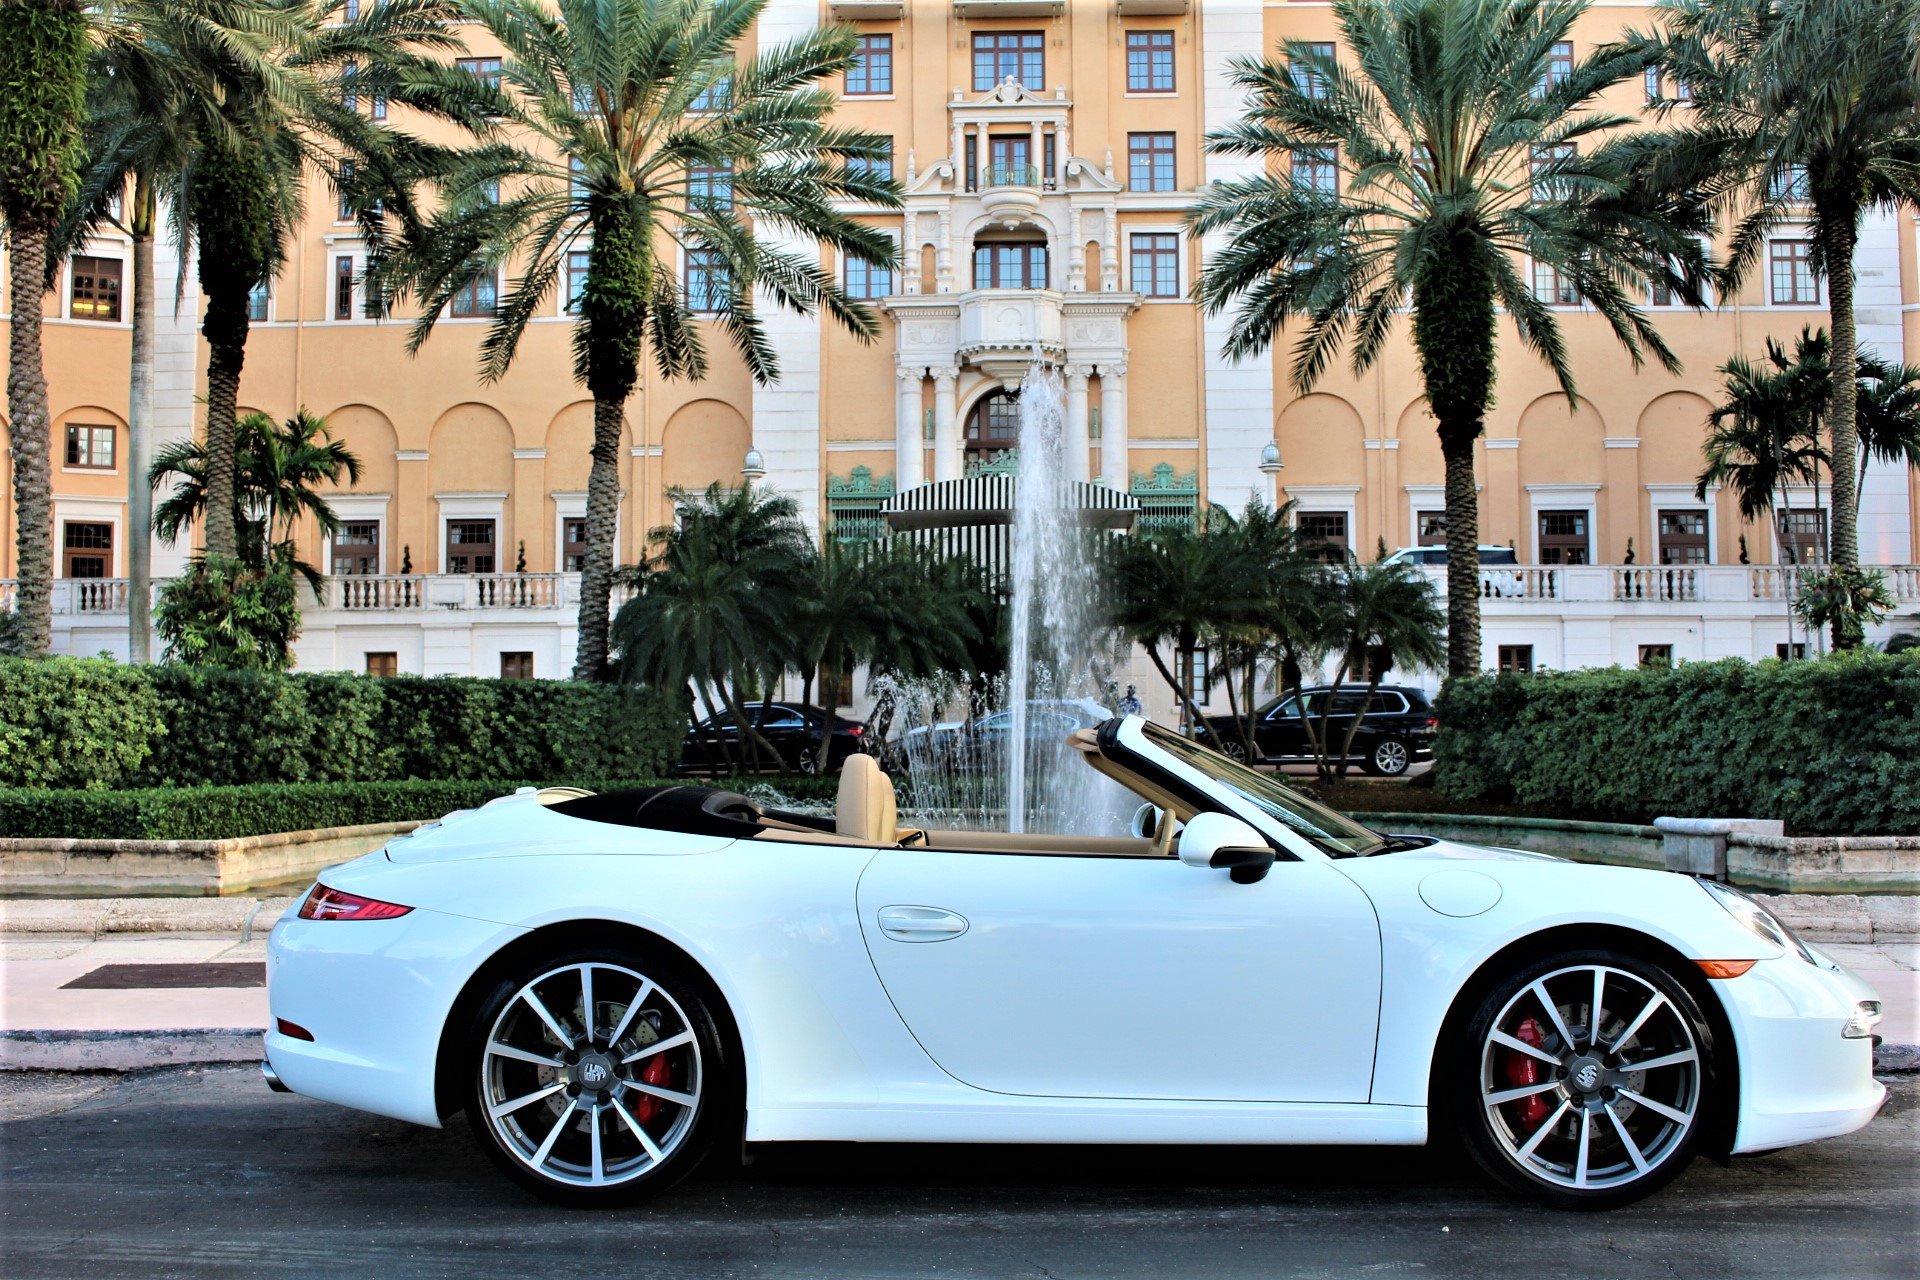 Used 2013 Porsche 911 Carrera S for sale Sold at The Gables Sports Cars in Miami FL 33146 1